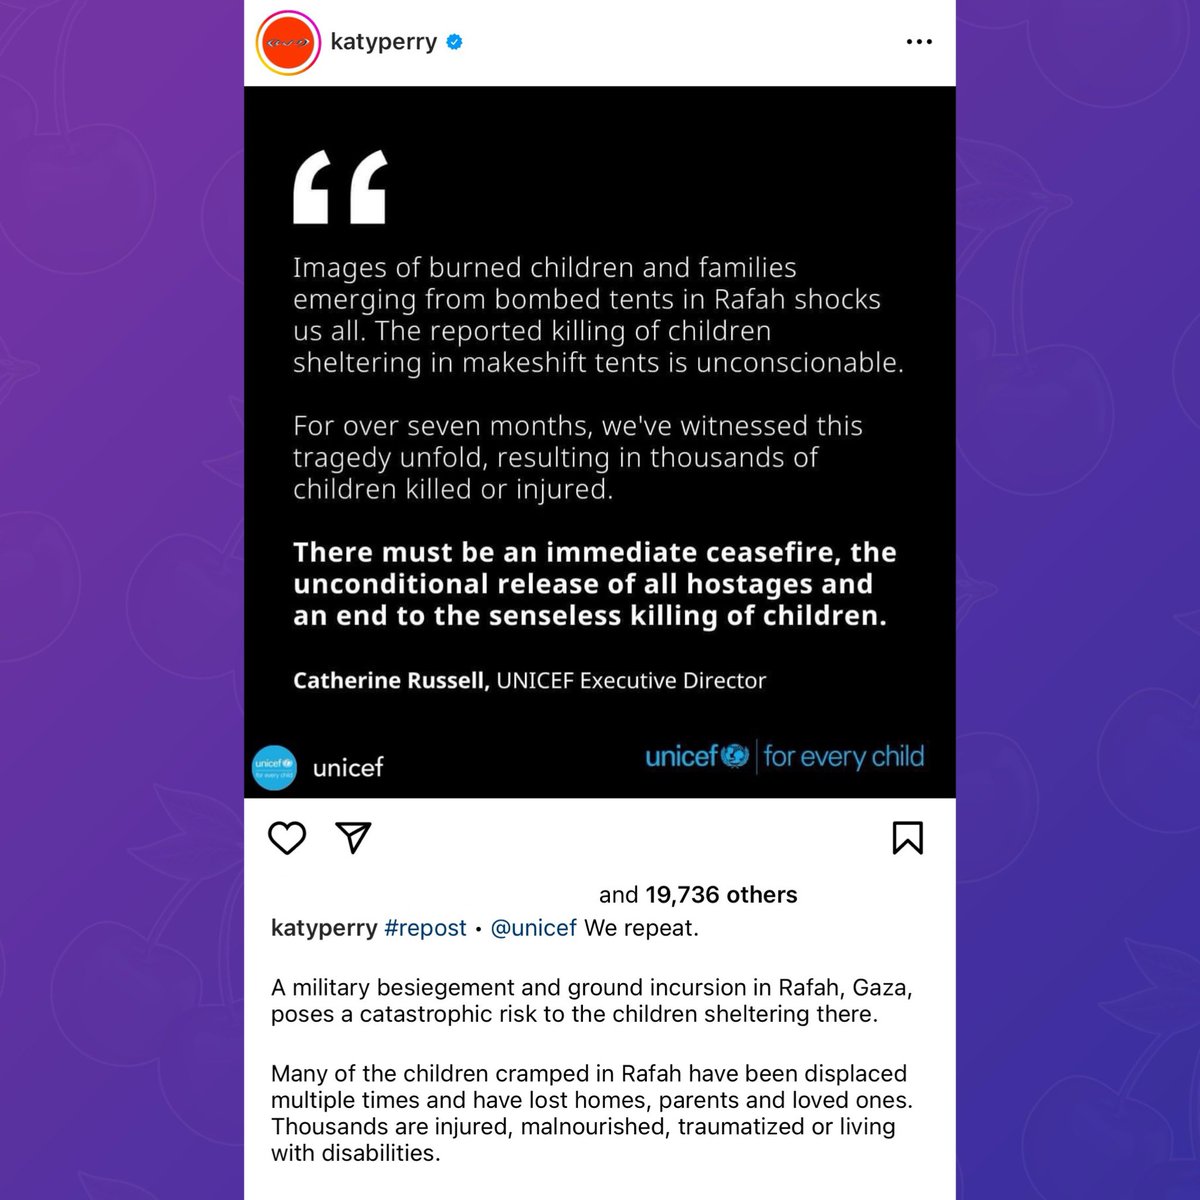 Katy Perry reposts UNICEF’s post calling for a ceasefire.